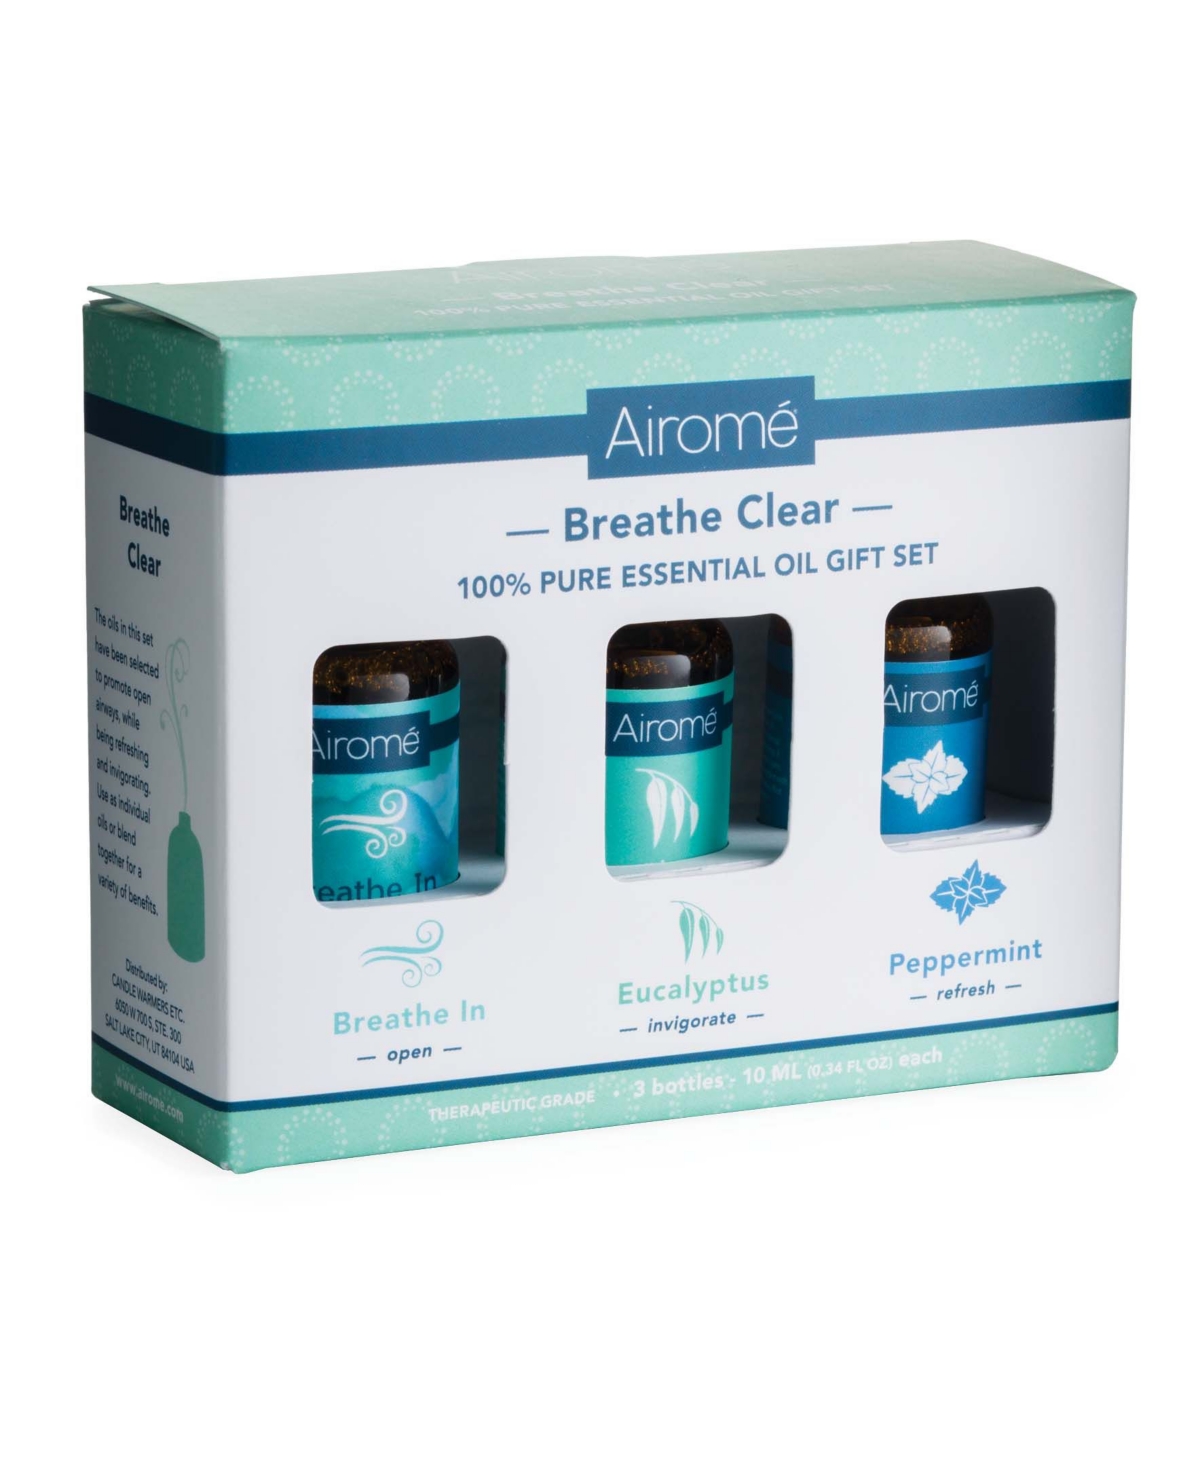 Airome Breath Clear Gift Set, 3 Piece In Eucalyptus/peppermint/breathe In